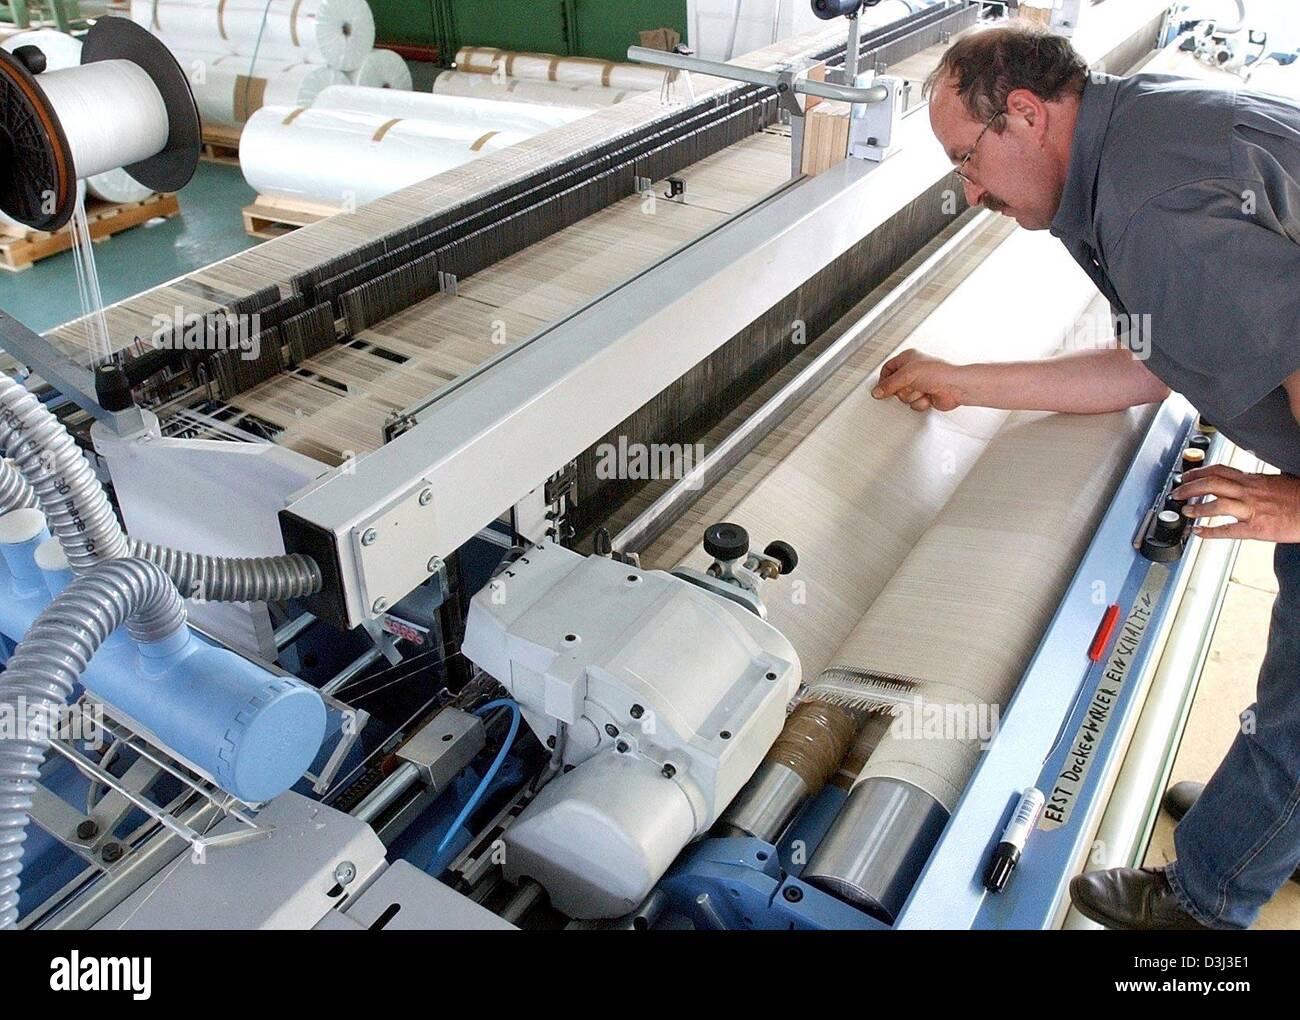 (dpa files) - Weaver Heinz Behrens shows a textile piece produced by a computer-controlled loom at the 'P-D aitec' company in Bitterfeld, eastern Germany, 26 June 2003. The company belongs to the Preiss-Daimler group and produces a patented impregnated glass fibre textiles, which are especially durable and enduring. The textiles are equally used in the space travel industry and the Stock Photo